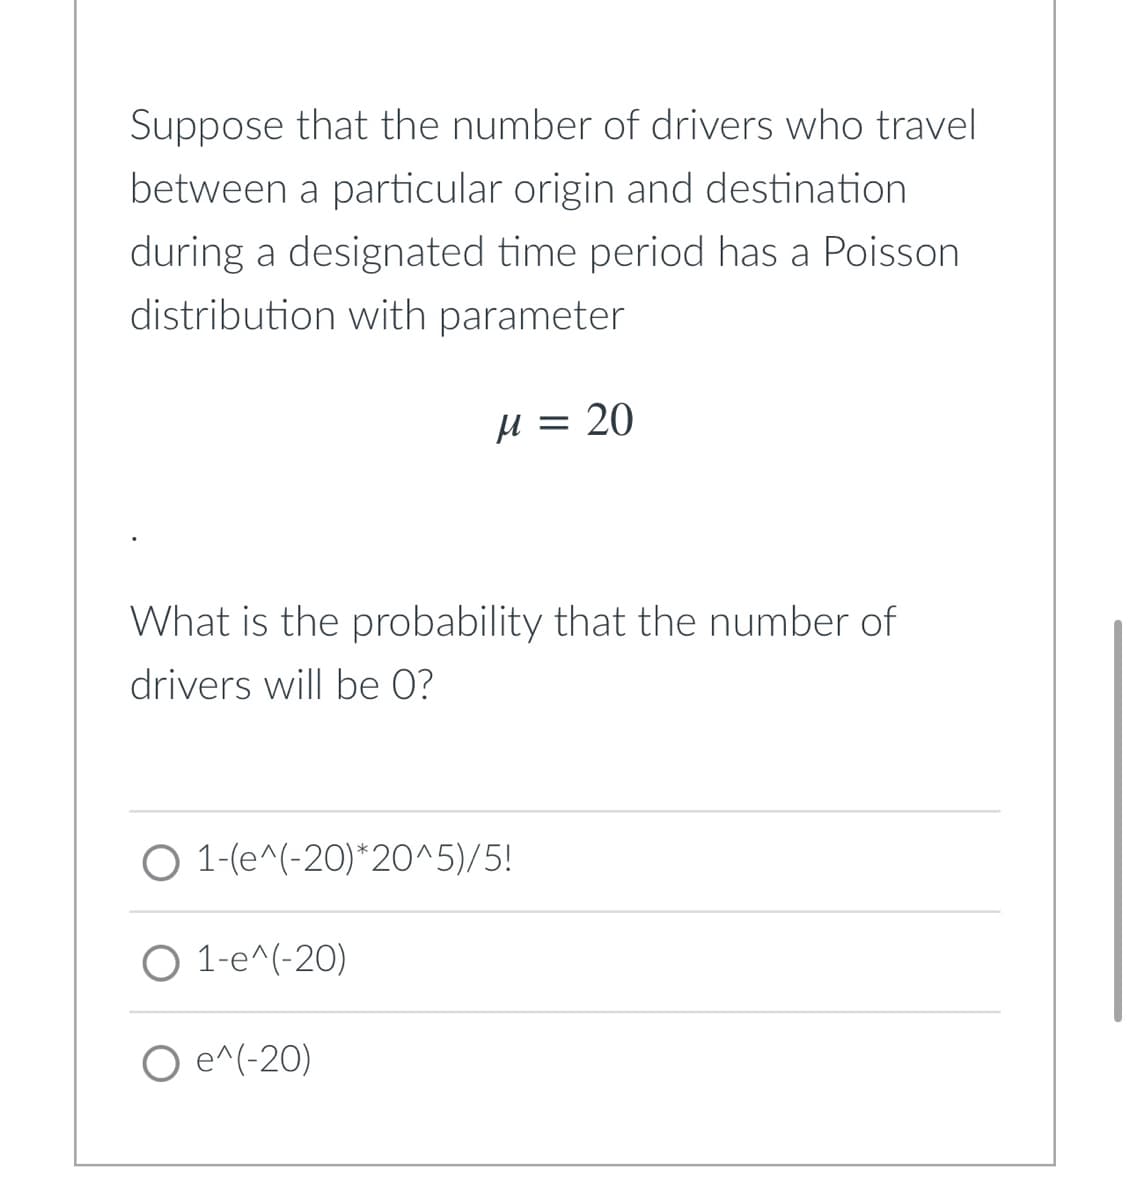 Suppose that the number of drivers who travel
between a particular origin and destination
during a designated time period has a Poisson
distribution with parameter
H = 20
What is the probability that the number of
drivers will be 0?
O 1-(e^(-20)*20^5)/5!
O 1-e^(-20)
O e^(-20)
